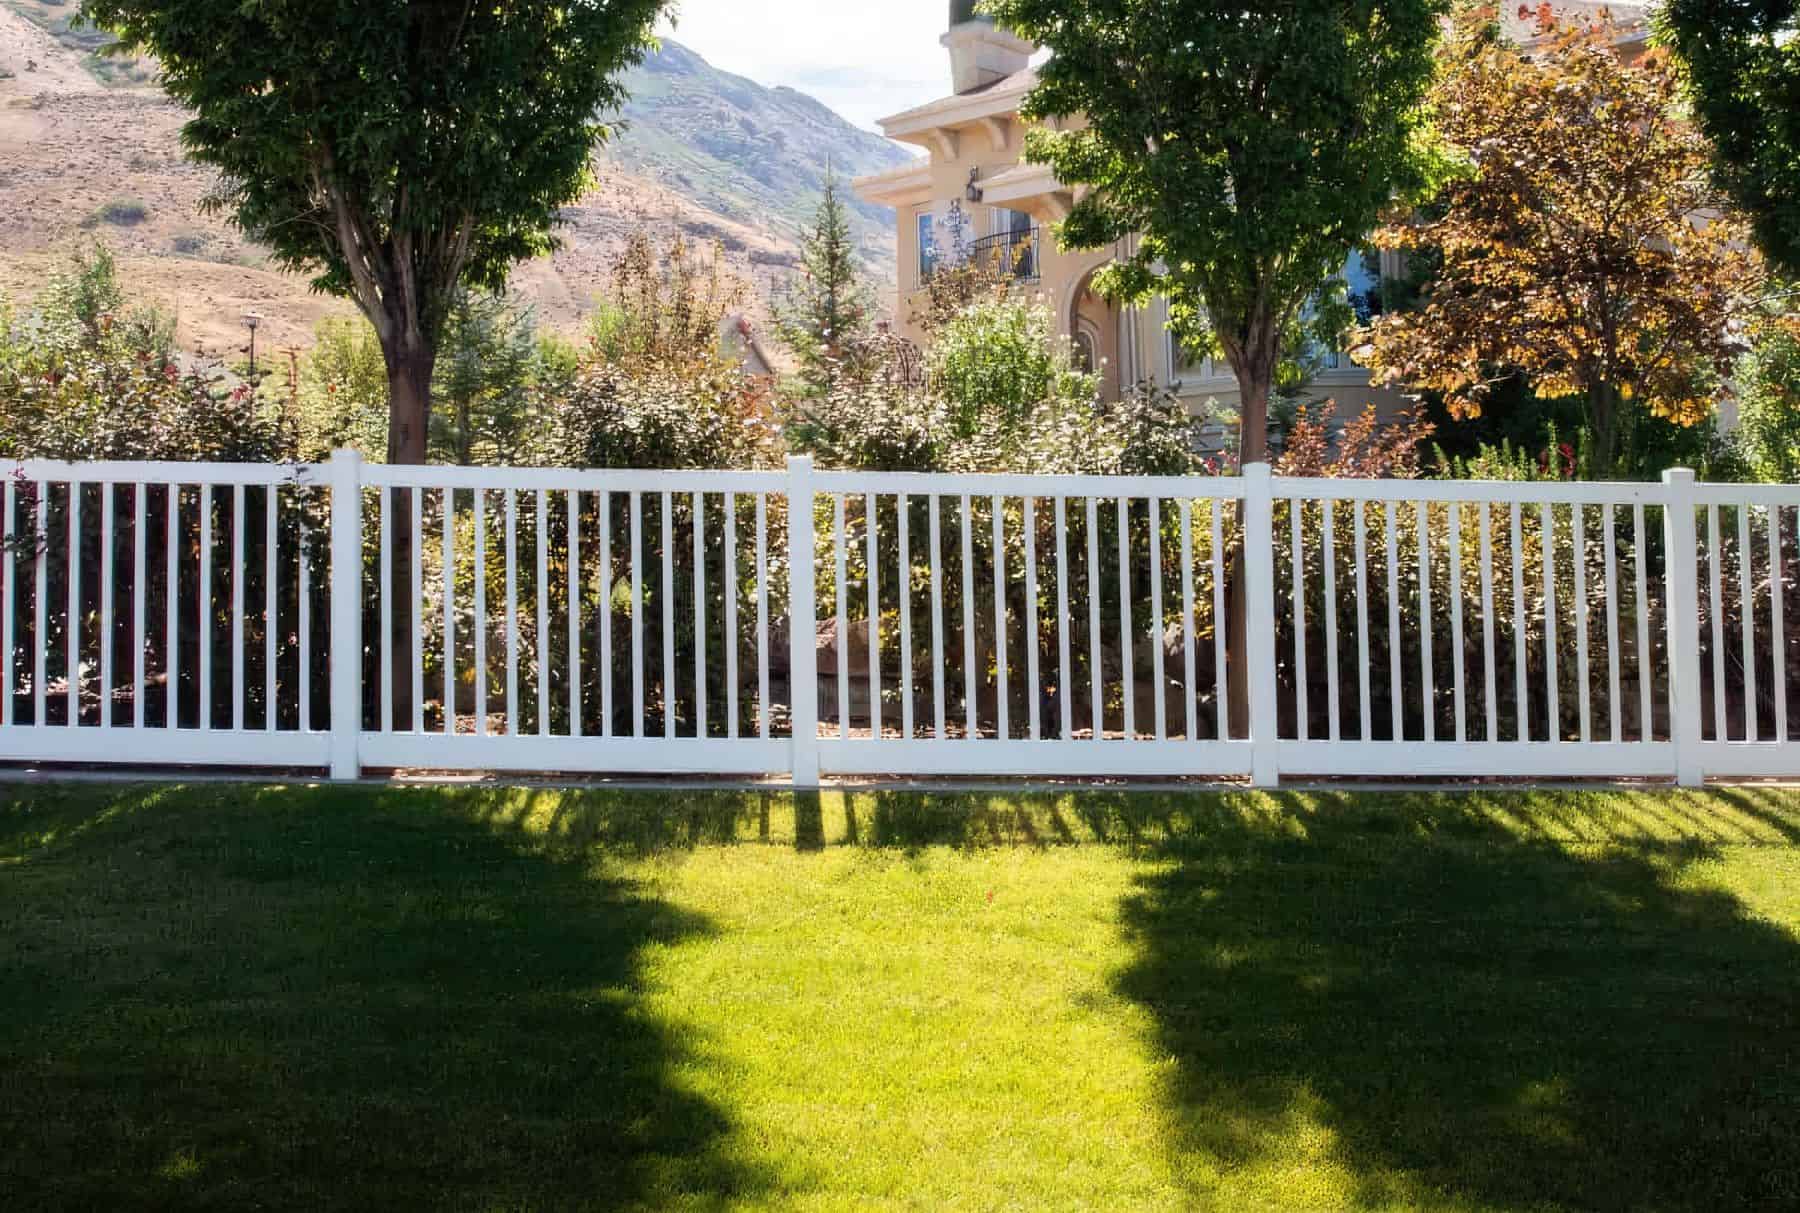 Vinyl closed-top picket fence surrounding garden on grassy lawn with trees in background - a charming outdoor oasis.